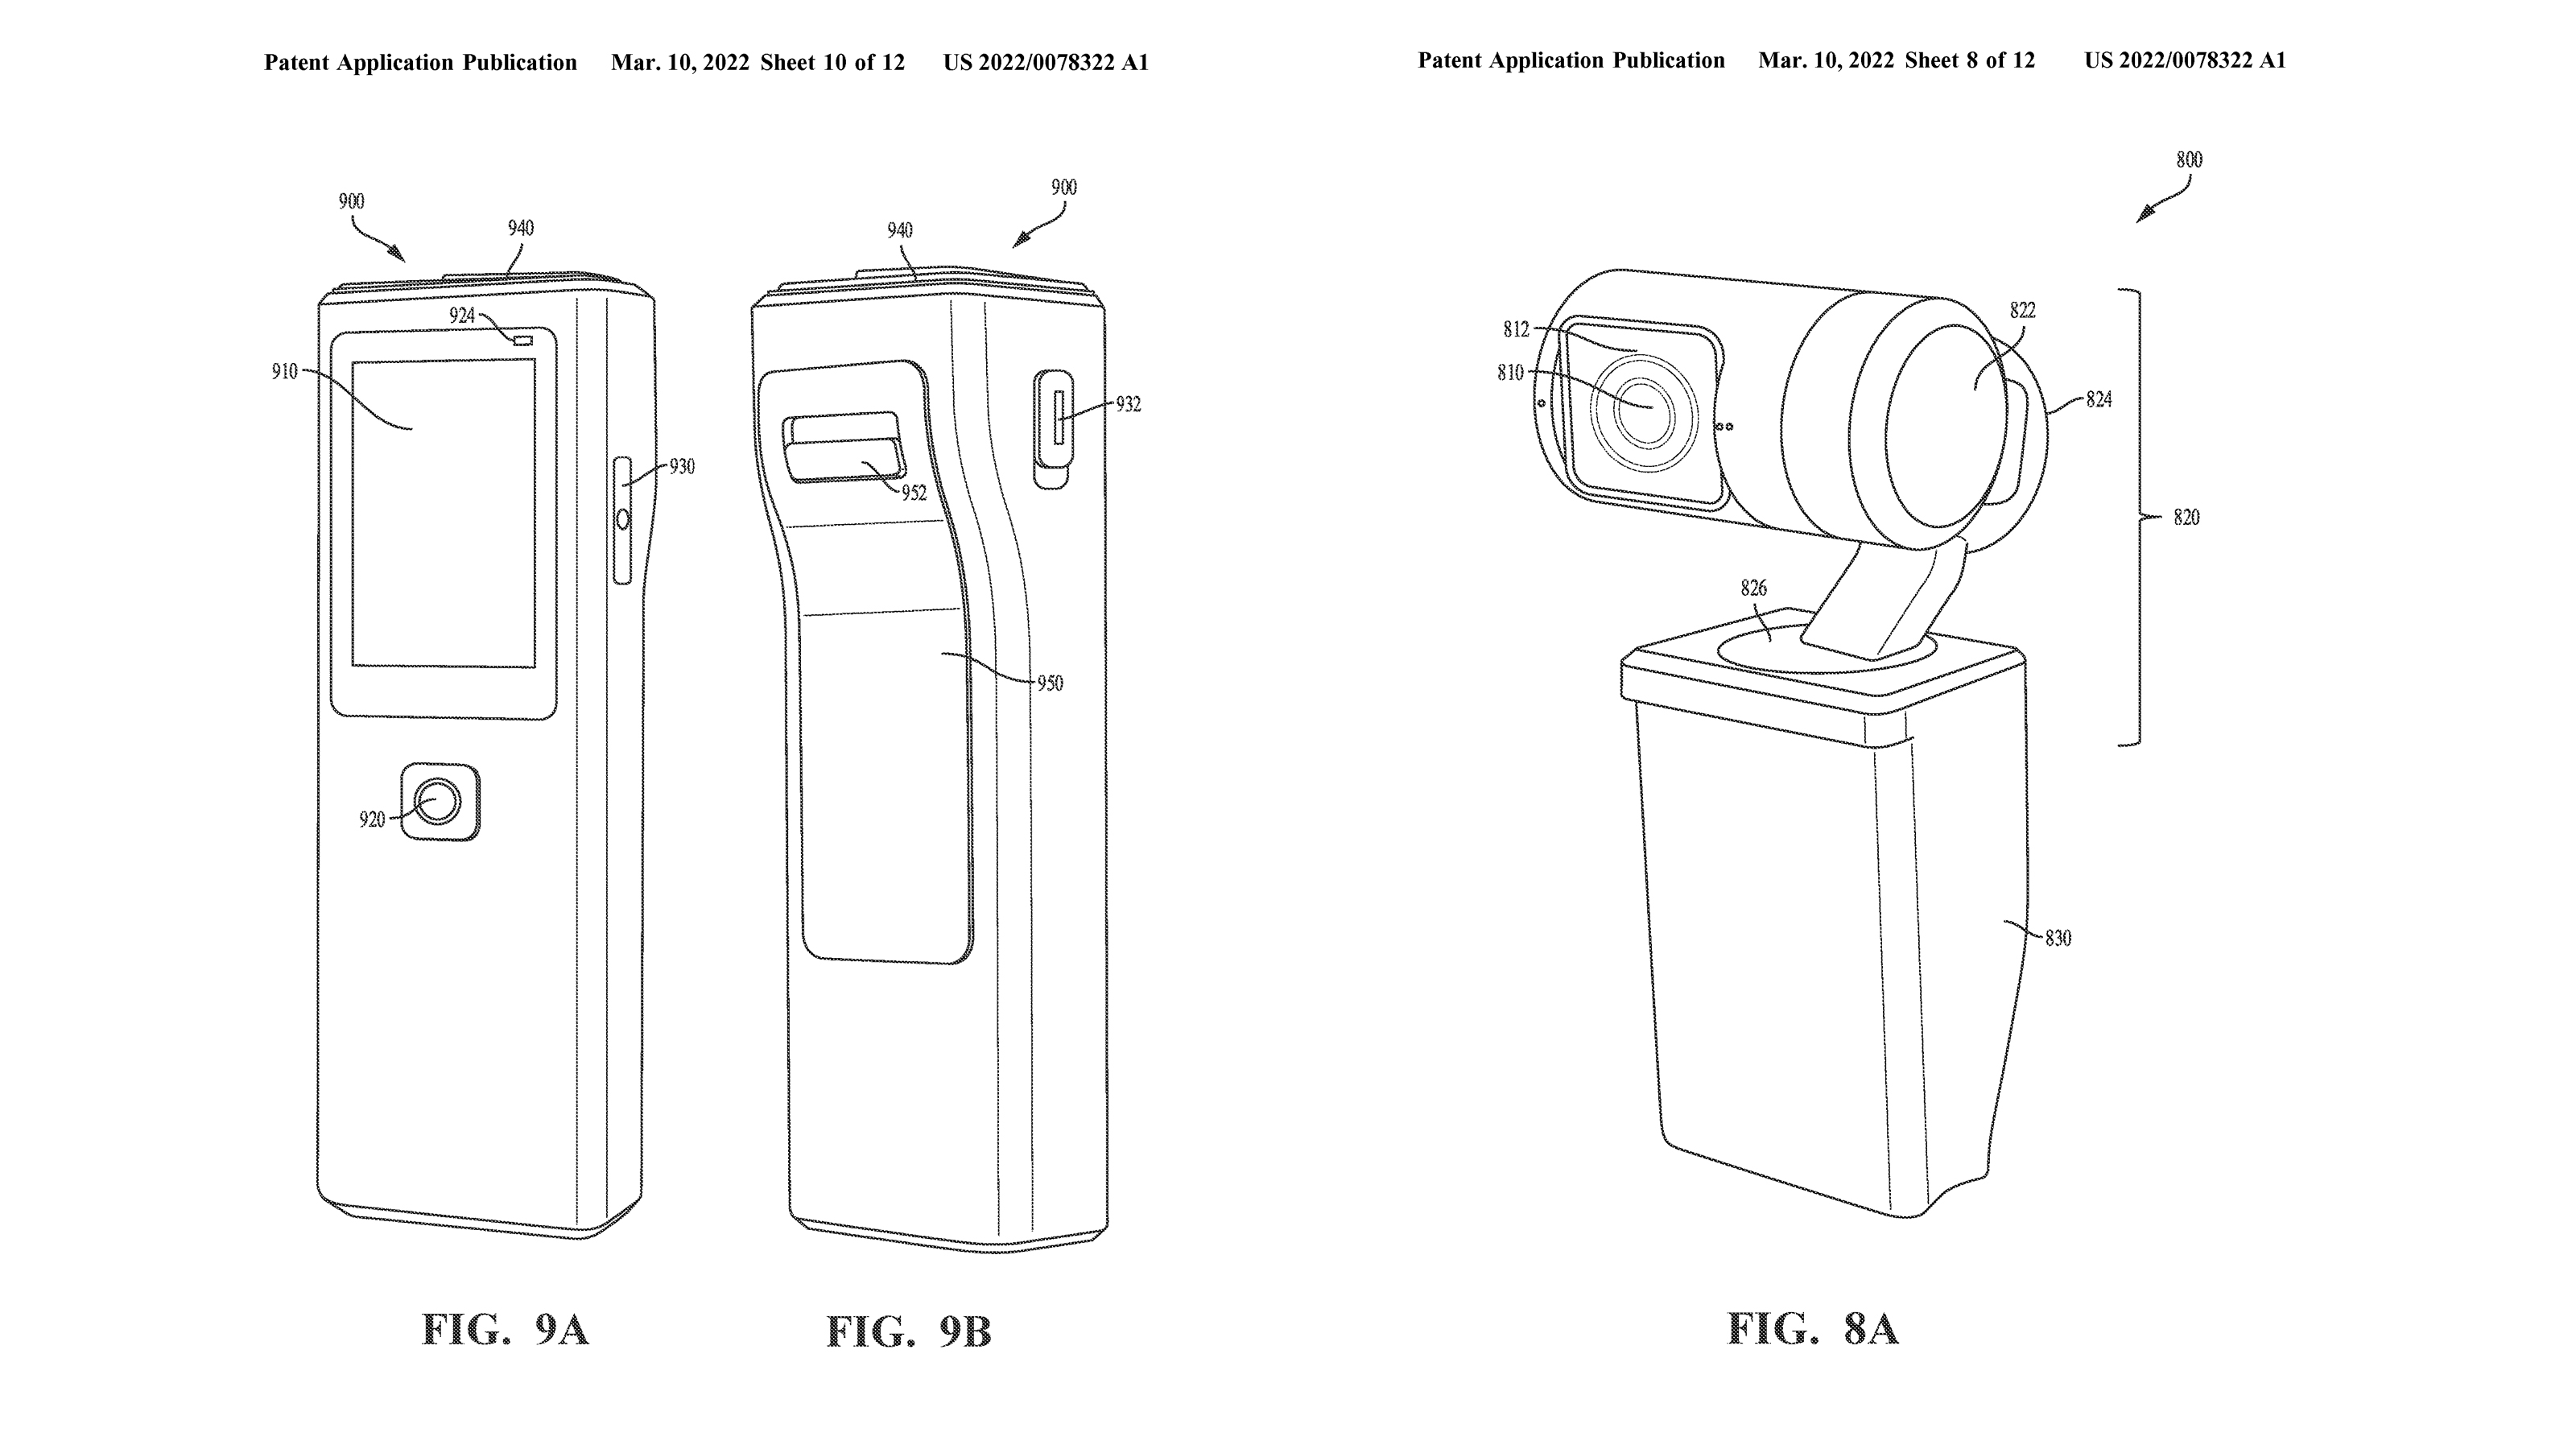 Drawings from GoPro patents